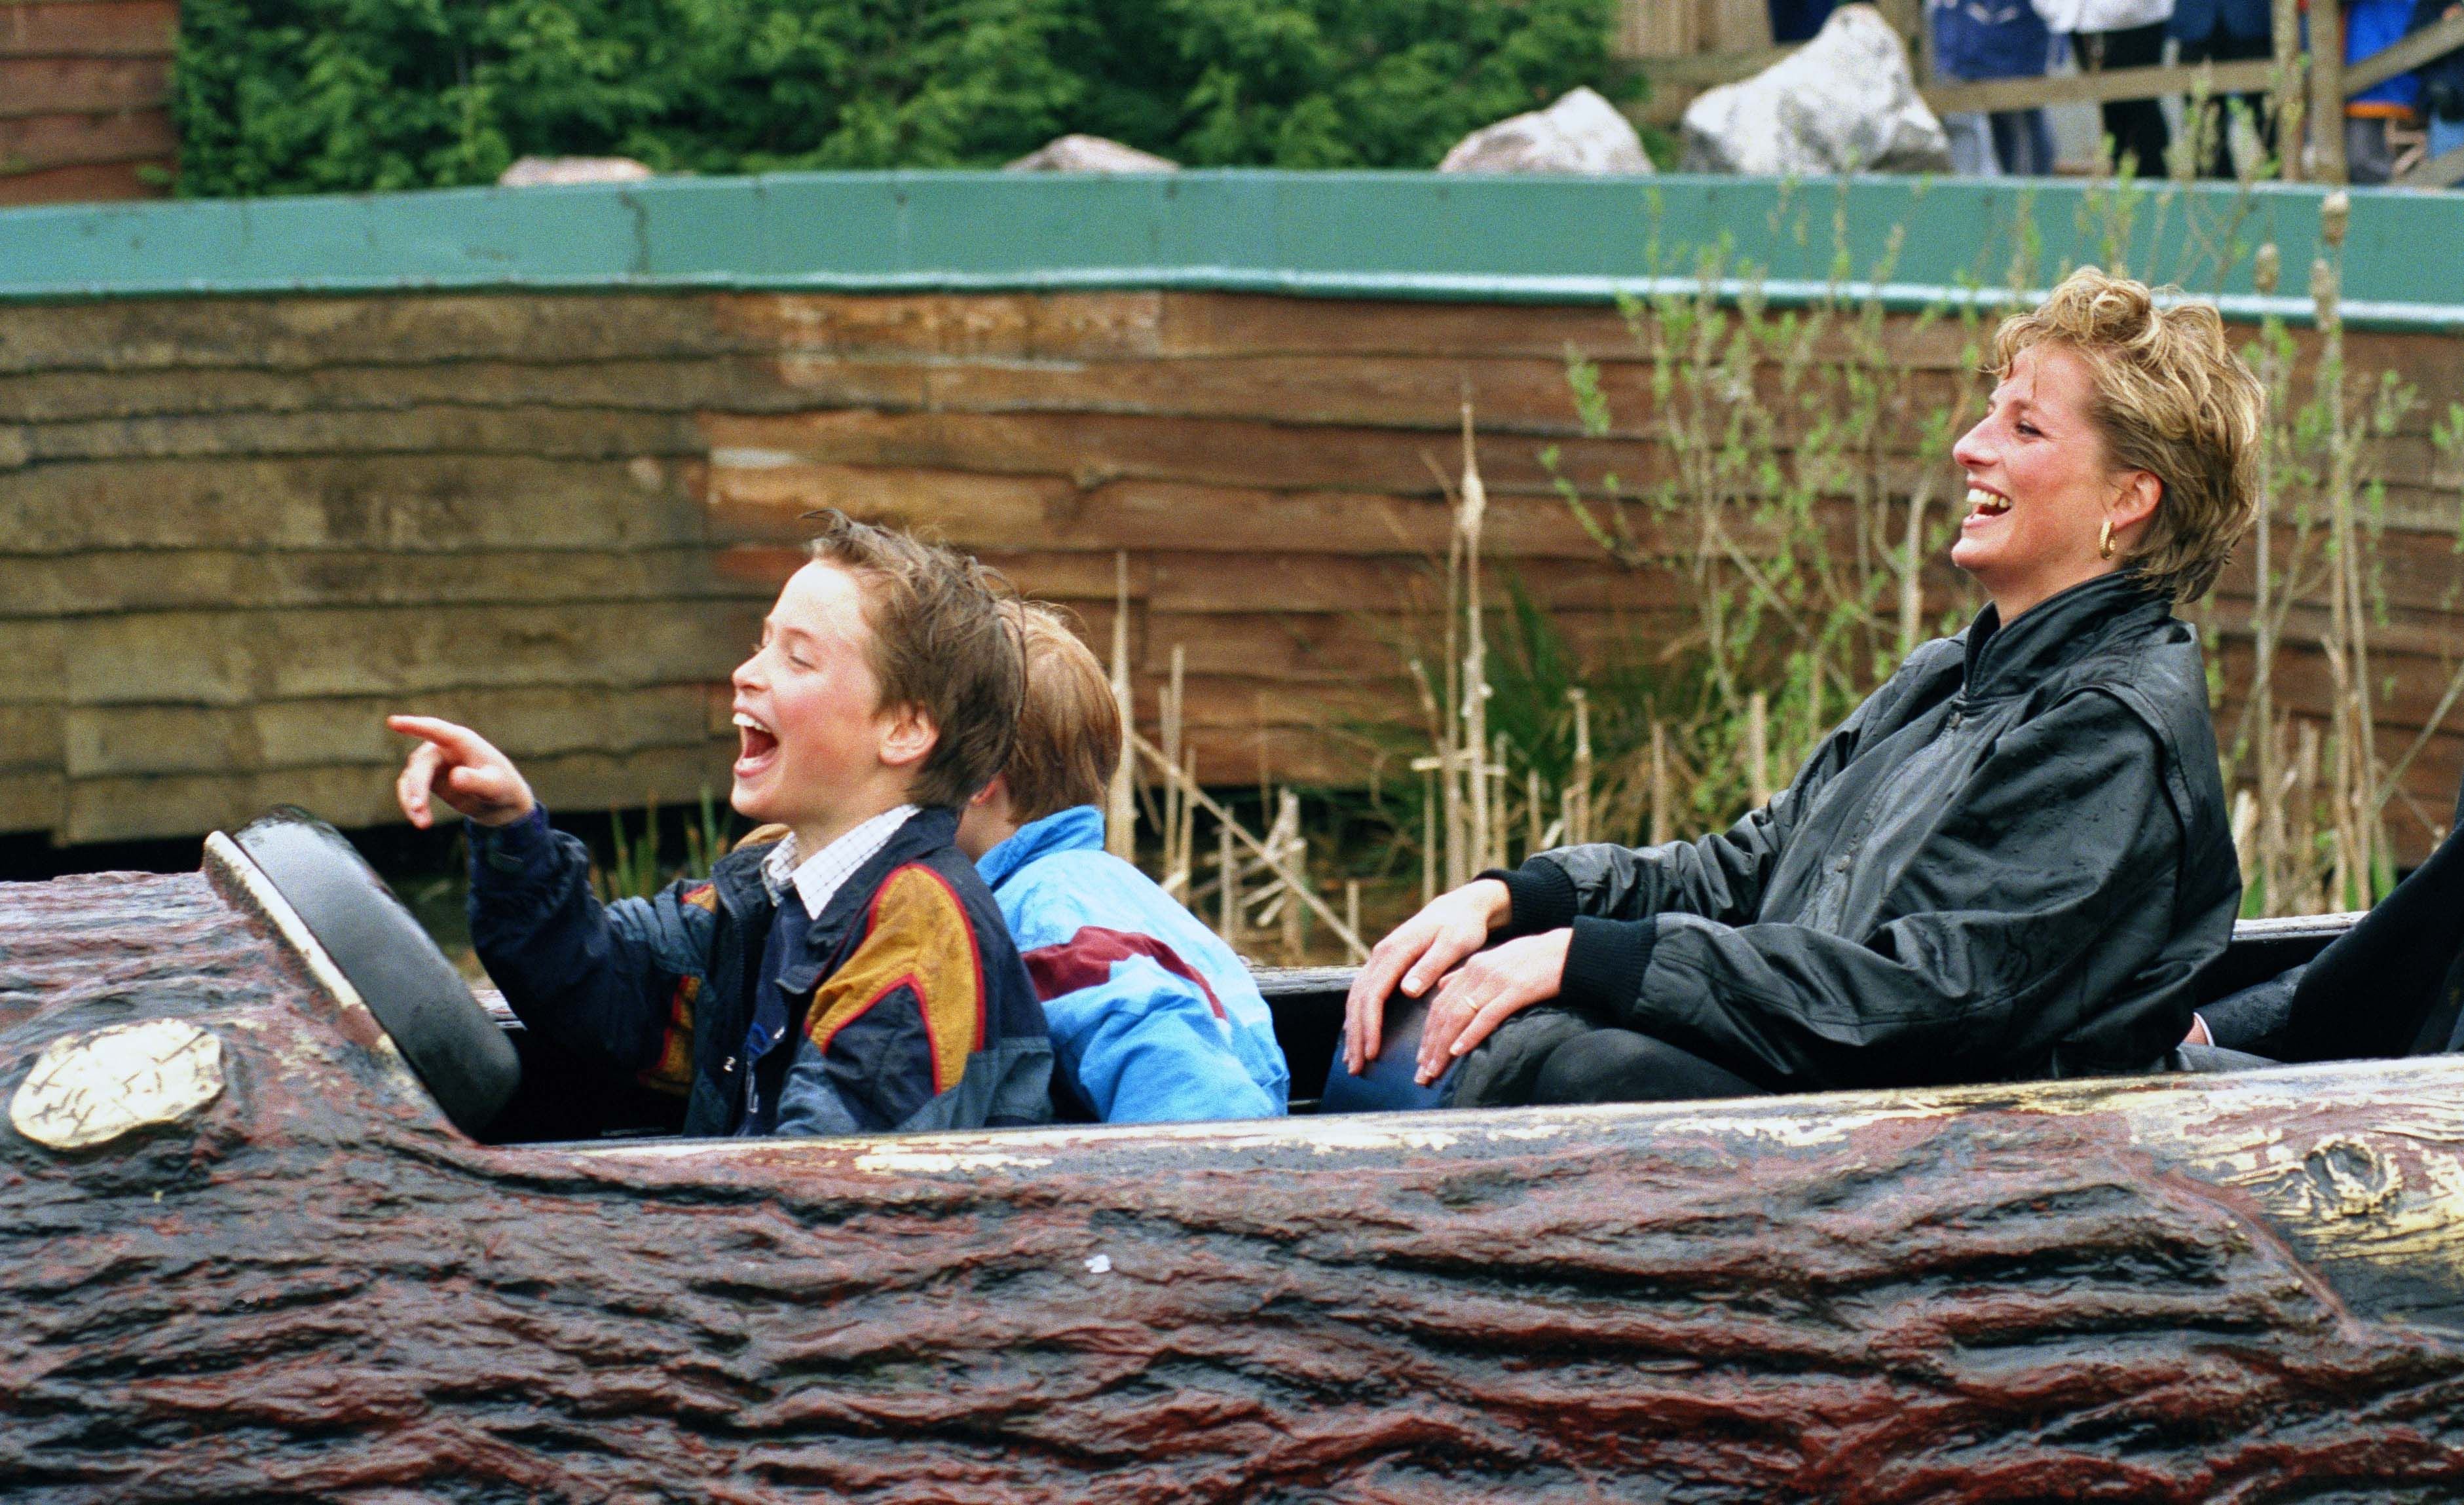 Princess Diana, Prince William, and Prince Harry at The 'Thorpe Park' Amusement Park on April 13, 1993 | Photo: Getty Images